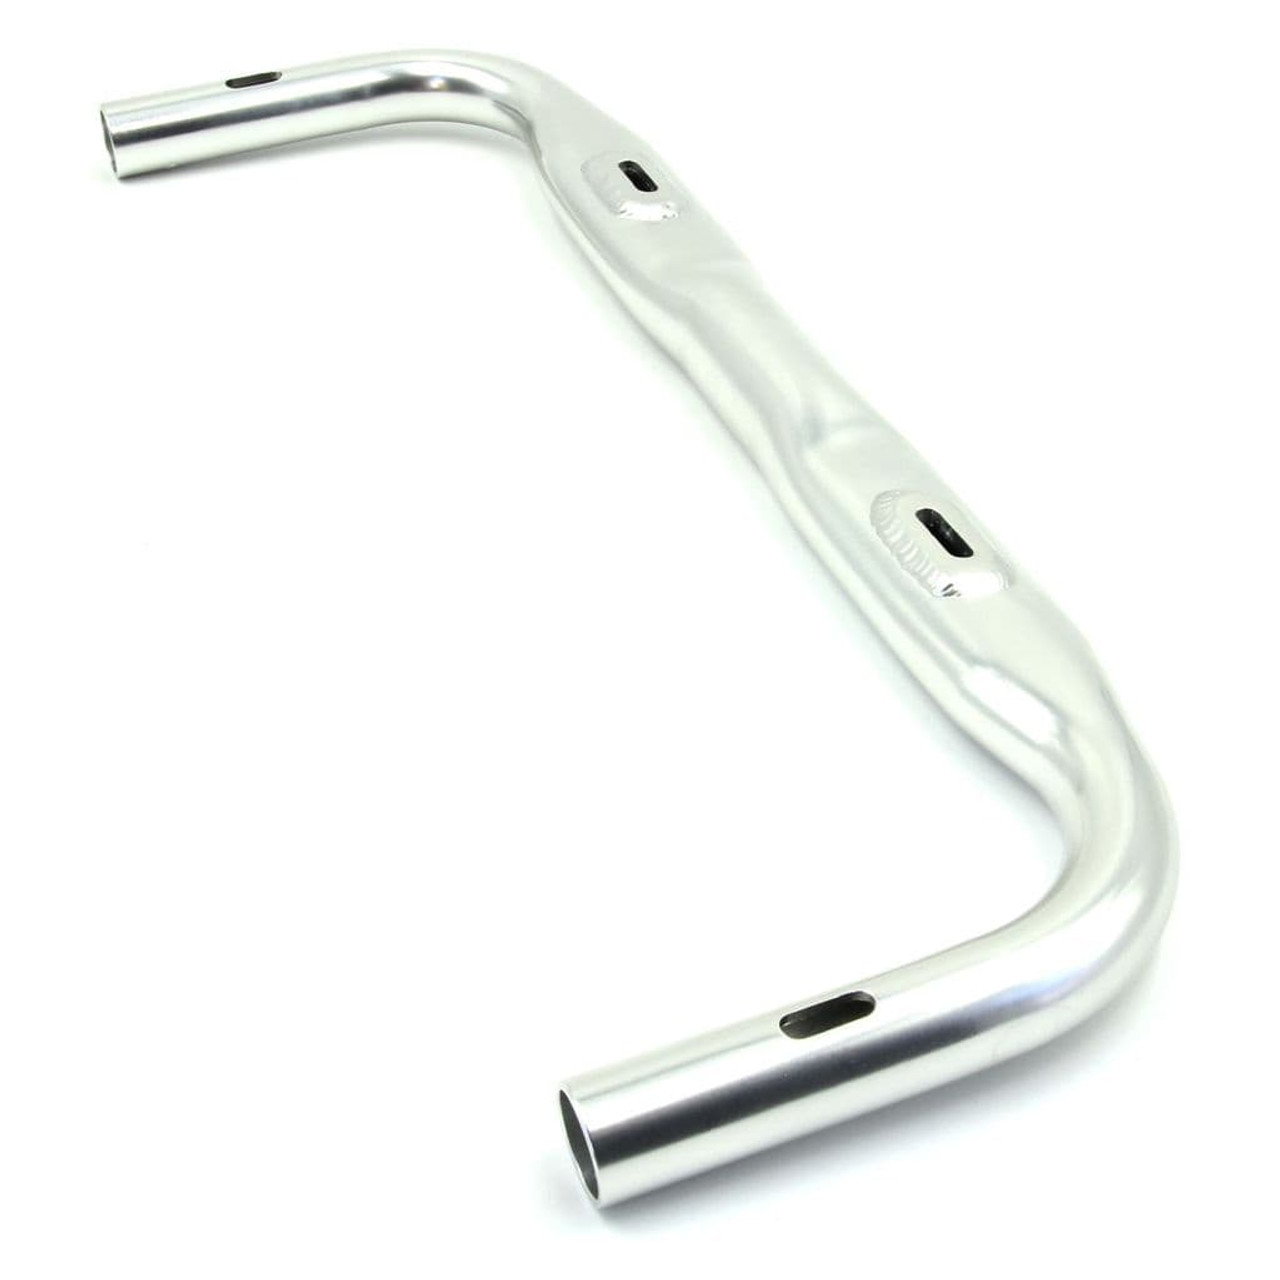 Nitto RB-036 Bullhorn Handlebars 31.8mm Clamp 420mm Wide In Silver